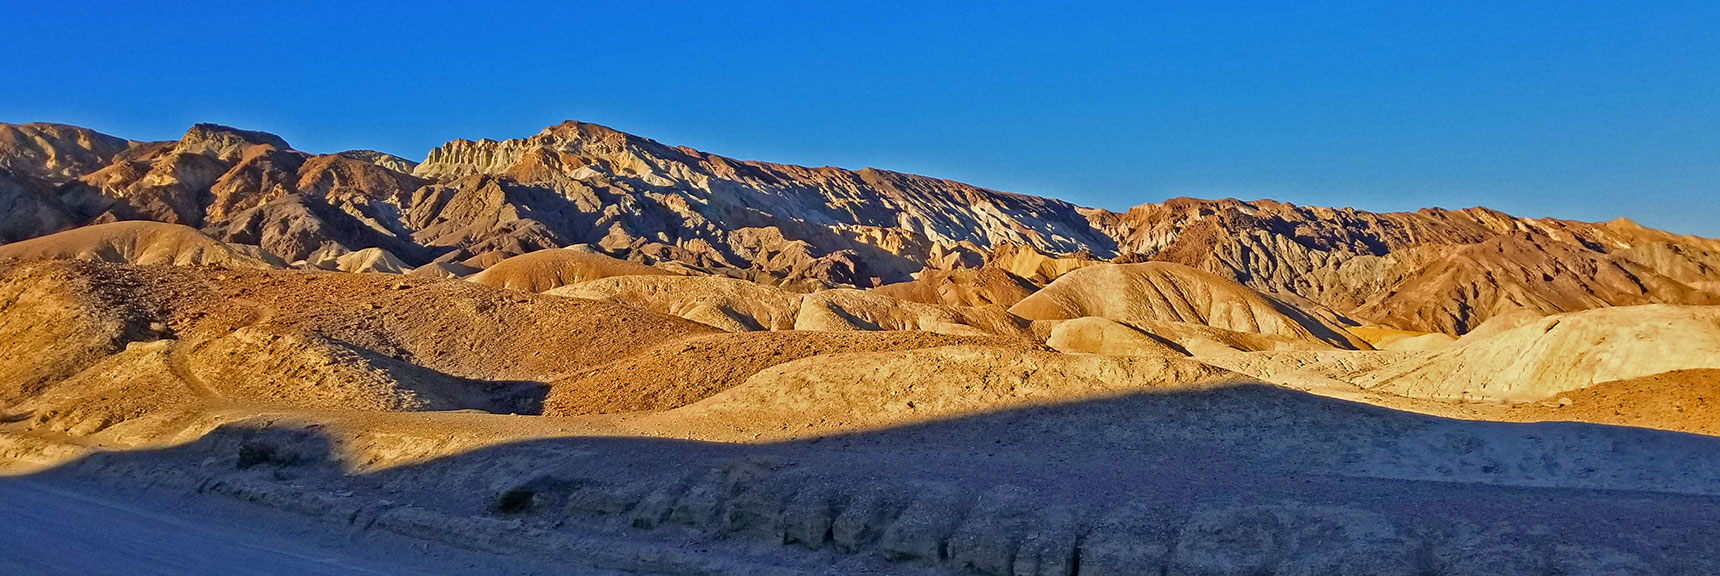 Colorful Northern Black Mountains in the Sunrise | Twenty Mule Team Canyon | Death Valley National Park, California